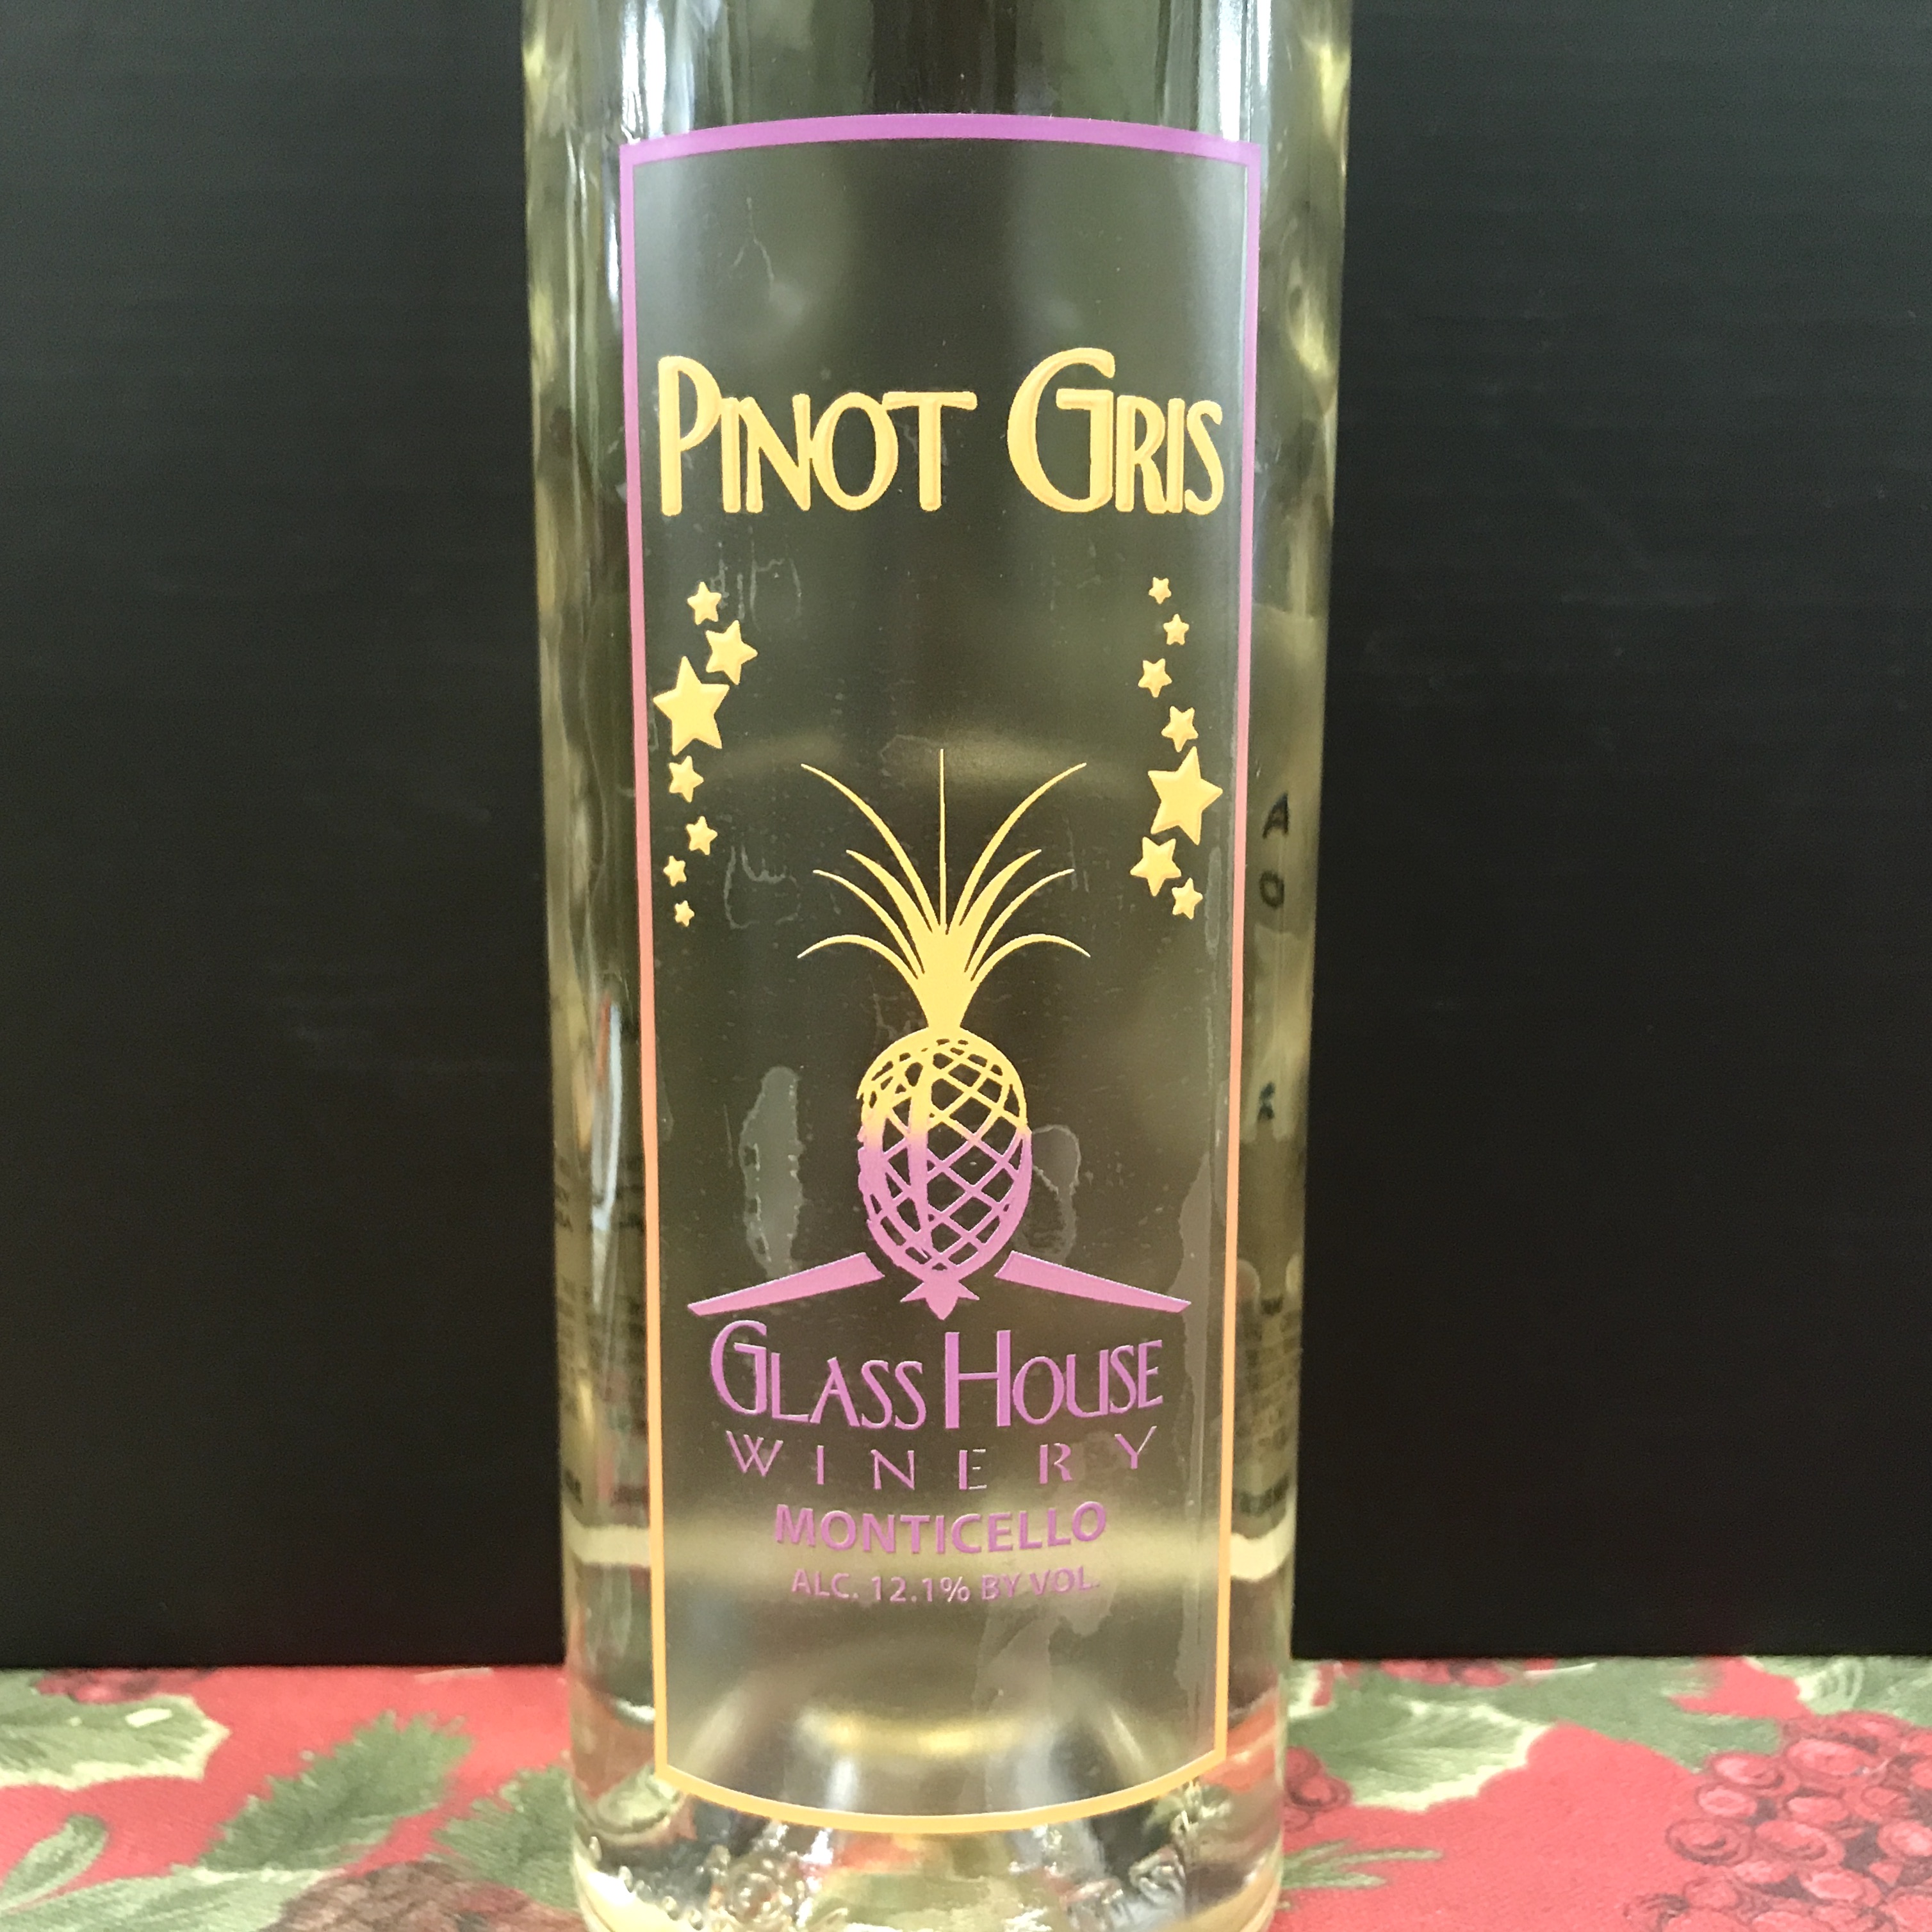 Glass House Pinot Gris